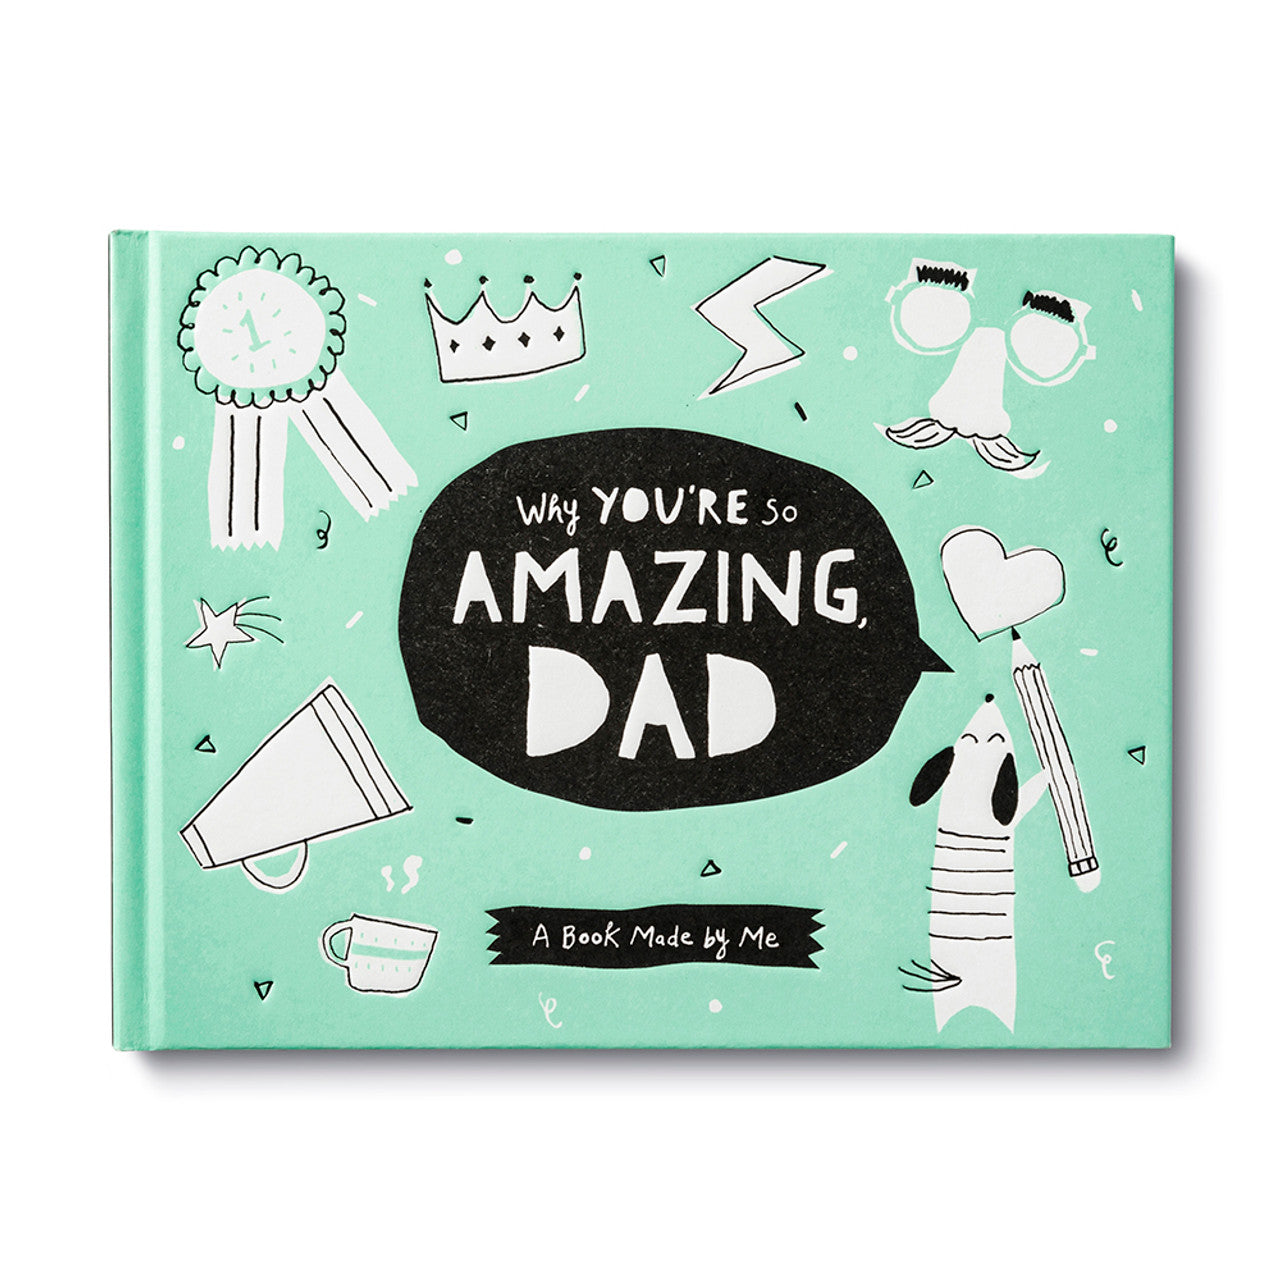 WHY YOU'RE SO AMAZING DAD ACTIVITY BOOK-Books & Stationery-COMPENDIUM-Coriander